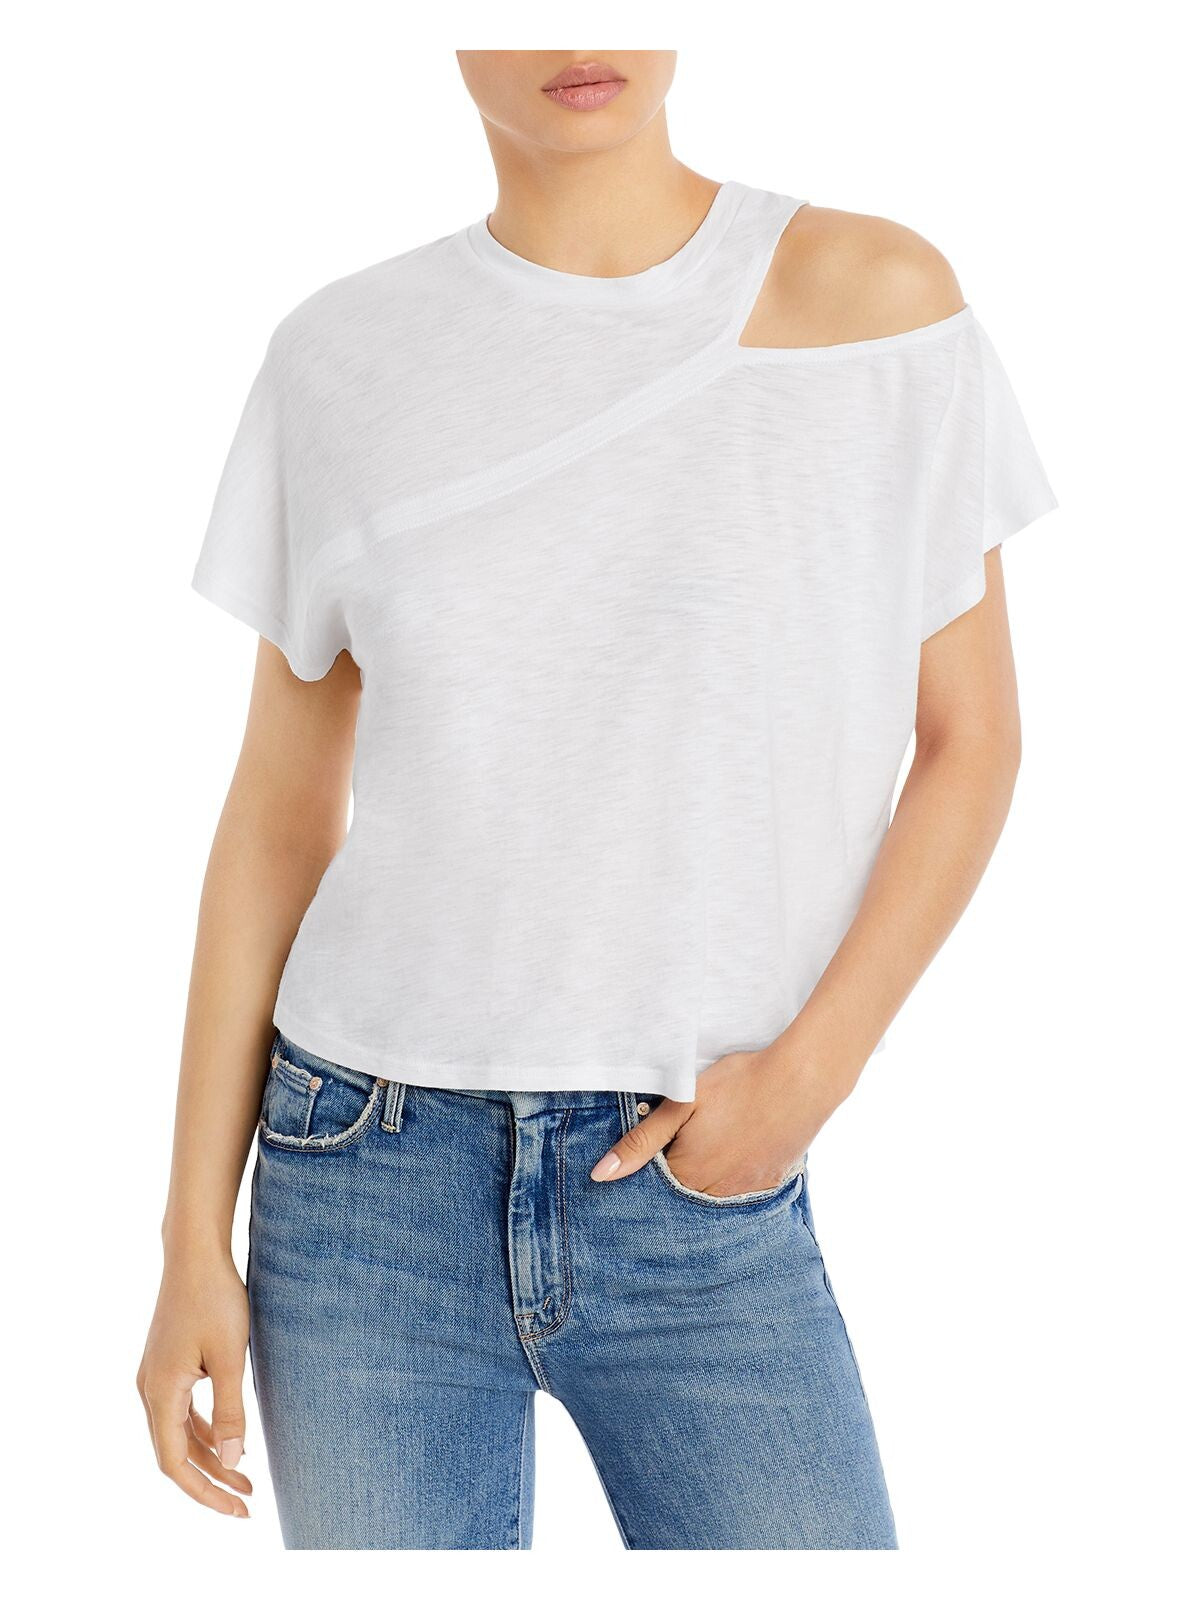 AQUA Womens White Cut Out Pullover Seamed Short Sleeve Crew Neck T-Shirt S